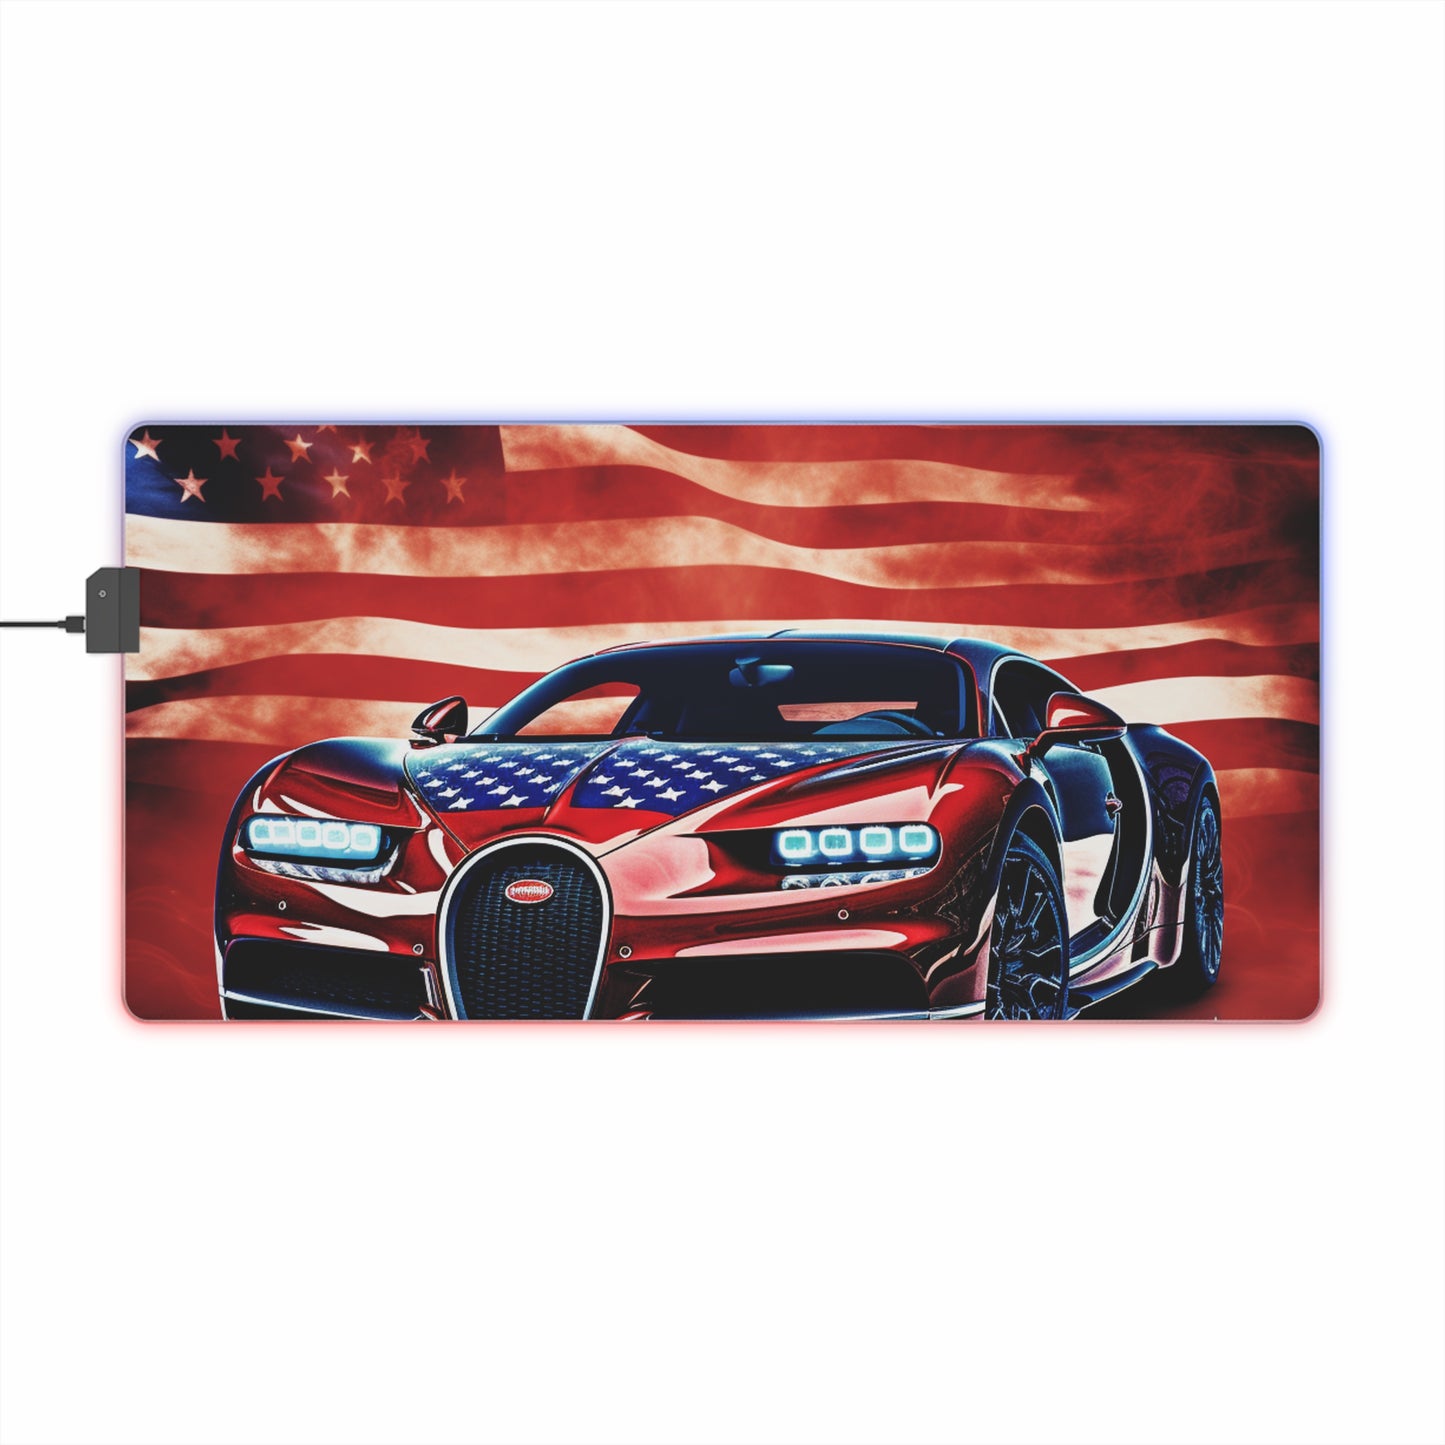 LED Gaming Mouse Pad Abstract American Flag Background Bugatti 3